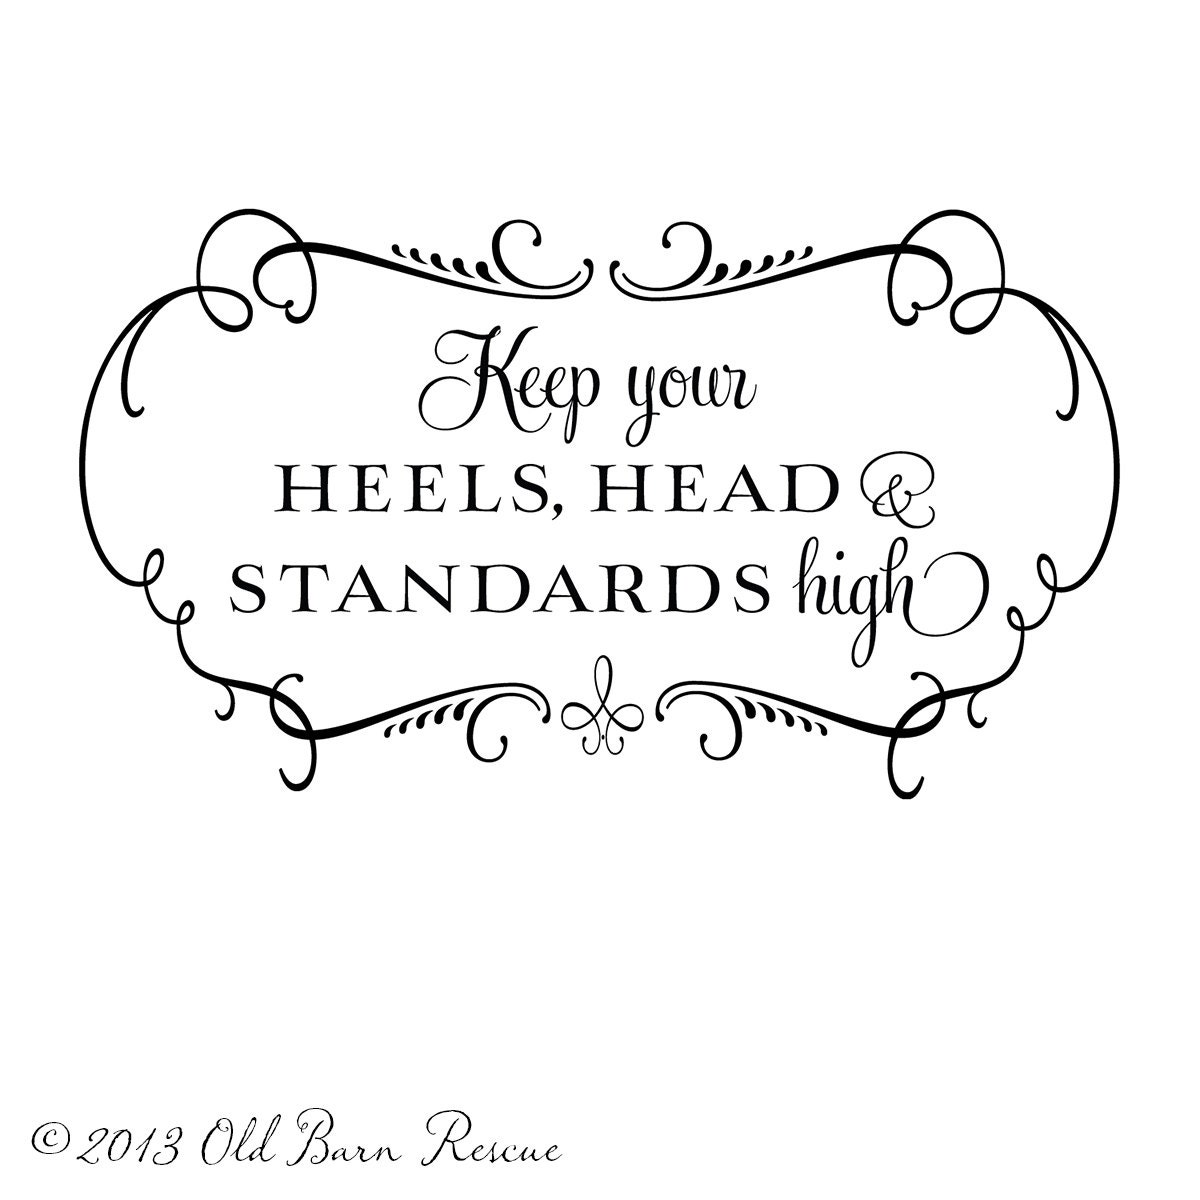 Keep Your Heels, Head & Standards High Poster | Pretty quotes, Motivational  quotes, Standards quotes